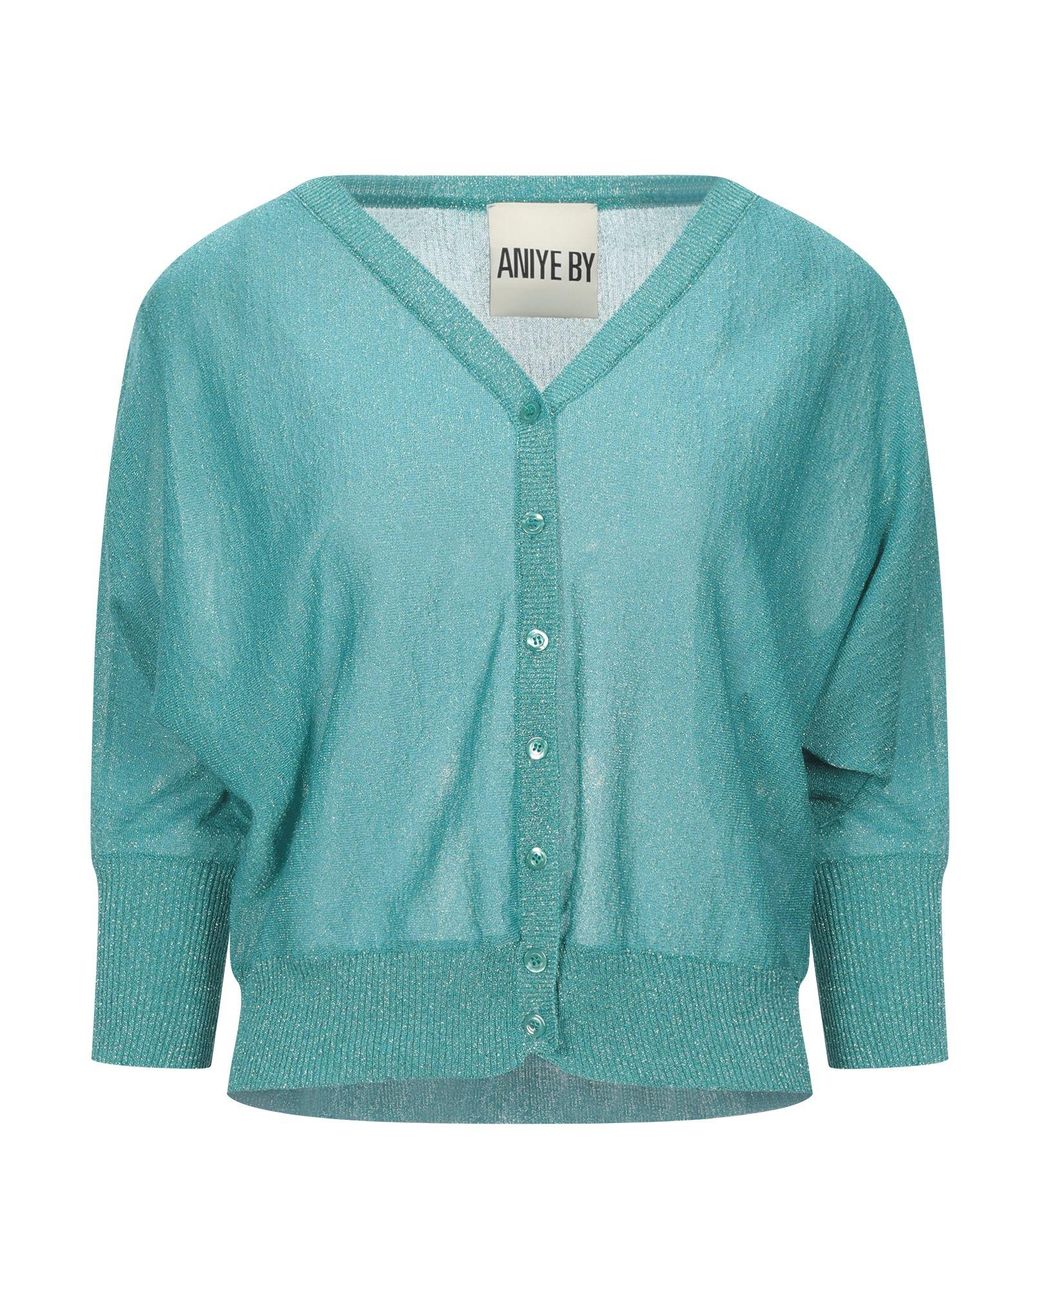 Aniye By Synthetic Cardigan in Turquoise (Blue) | Lyst